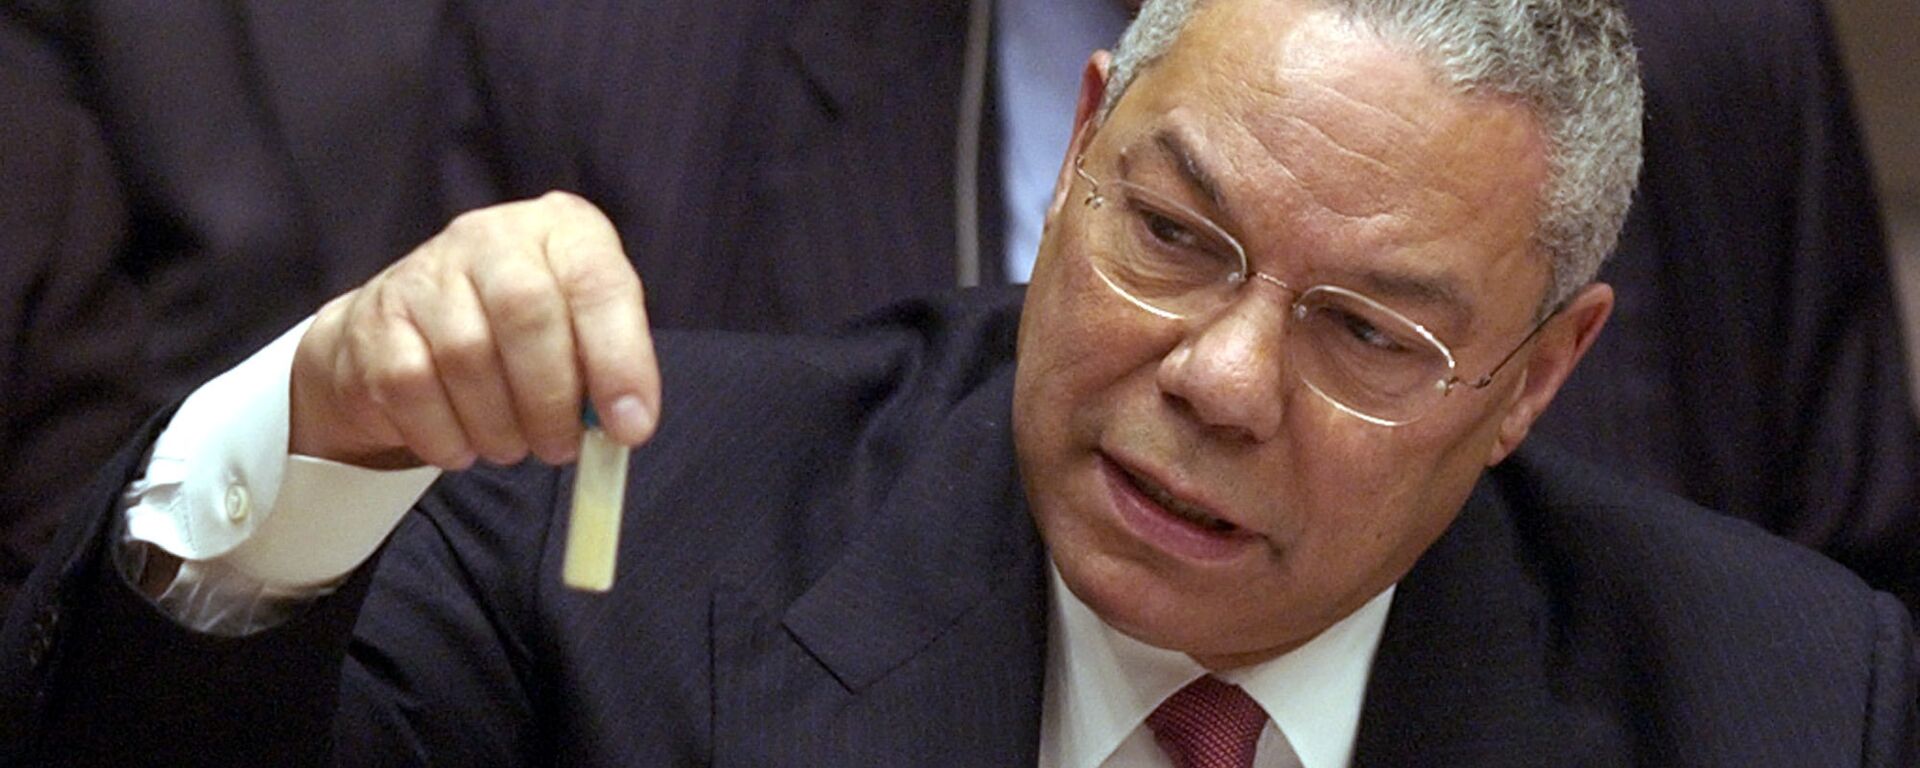 U.S. Secretary of State Colin Powell holds up a vial that he said could contain anthrax as he presents evidence of Iraq's alleged weapons programs to the United Nations Security Council. (File) - Sputnik International, 1920, 05.02.2023